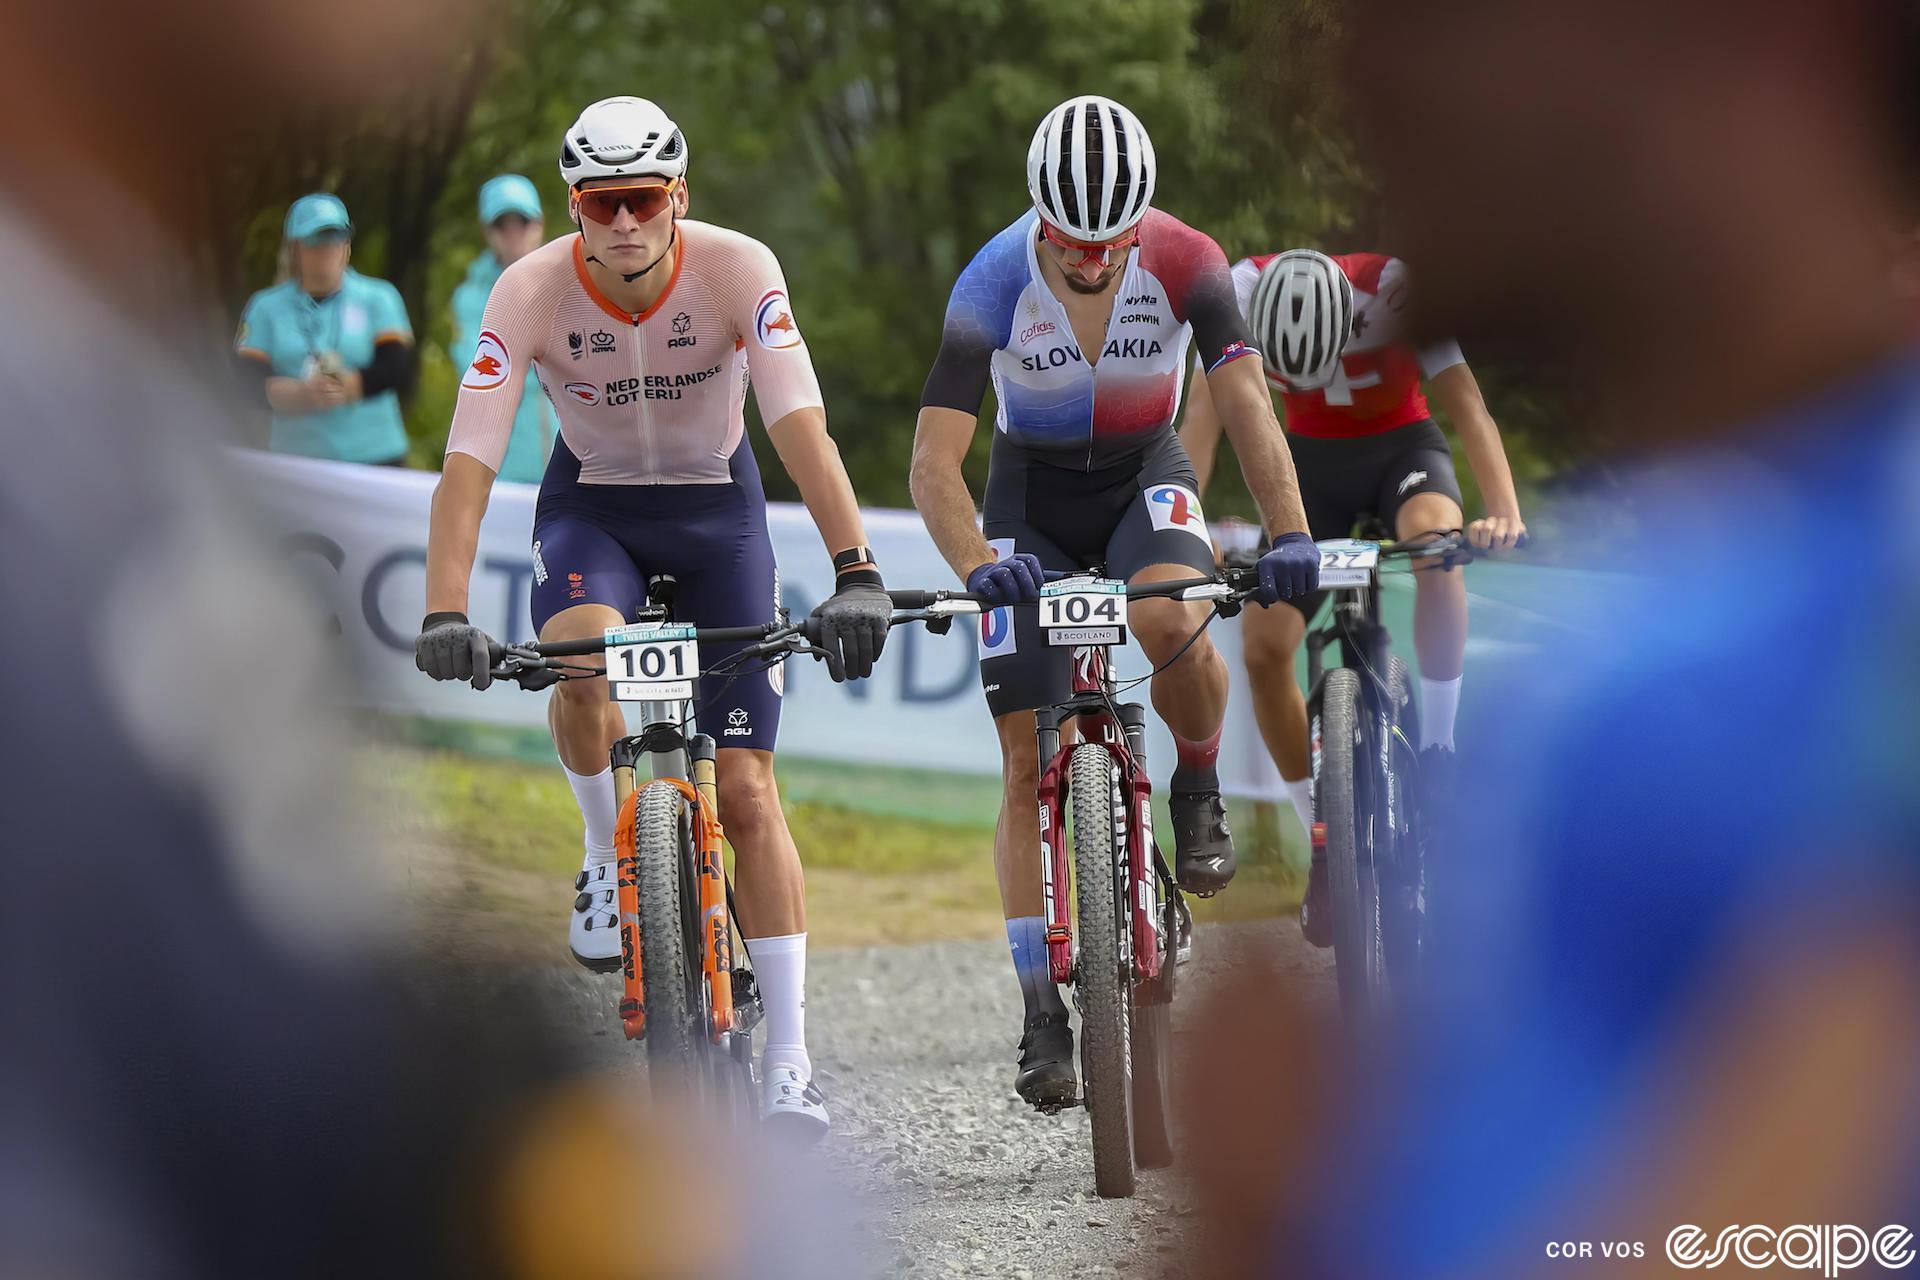 Mathieu van der Poel and Peter Sagan are framed between two blurred out fans as they ride to the start of the 2023 World Mountain Bike Championships in Glasgow, Scotland. They're both in national team kit. Van der Poel looks ahead with a neutral expression, while Sagan is looking down at his computer.